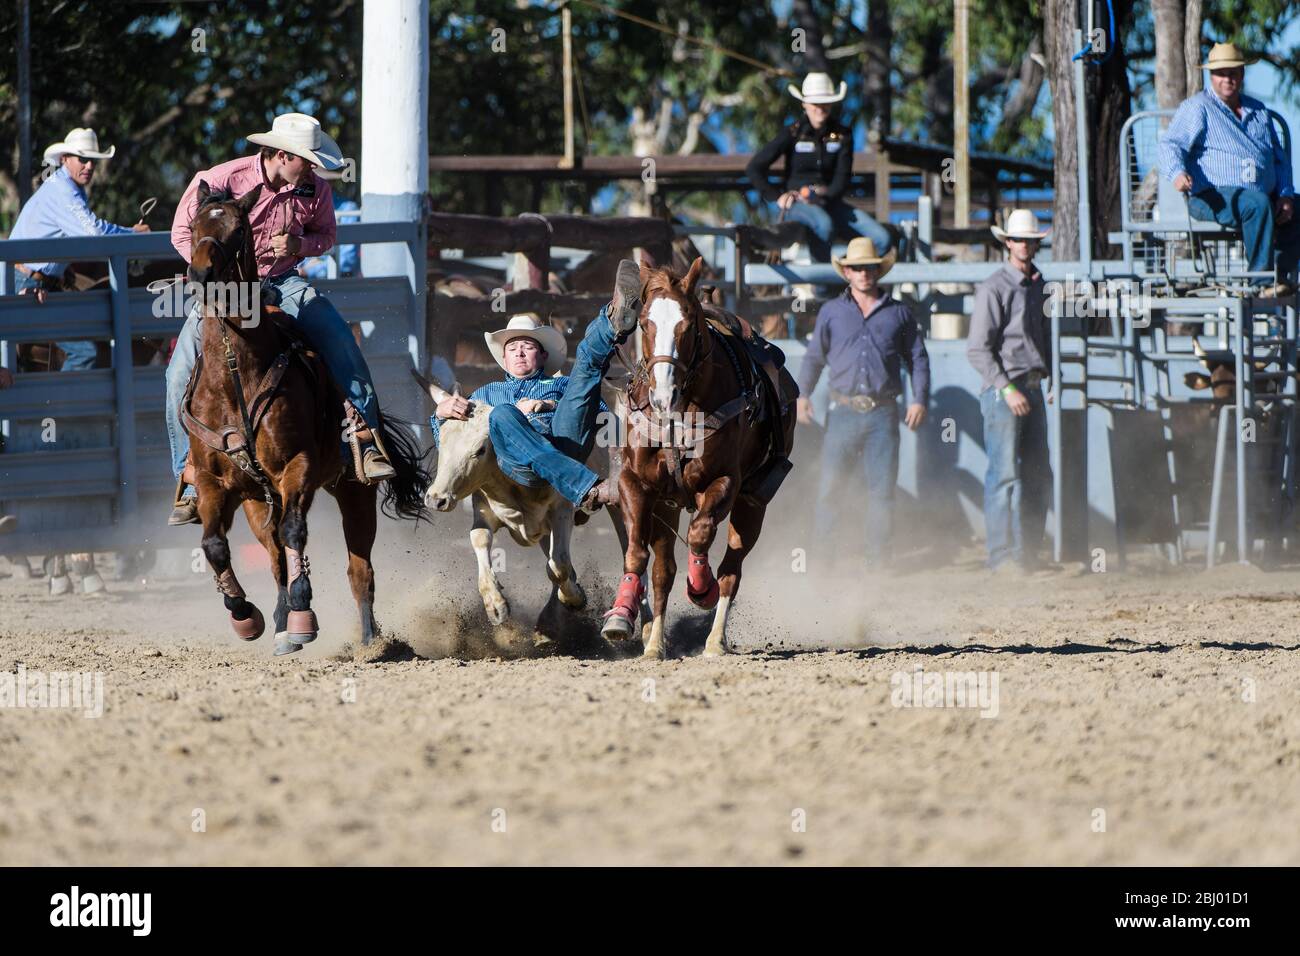 Team steer wrestling rodeo event with cowboy leaping from his horse onto the running steer at the Mareeba Rodeo in Australia. Stock Photo